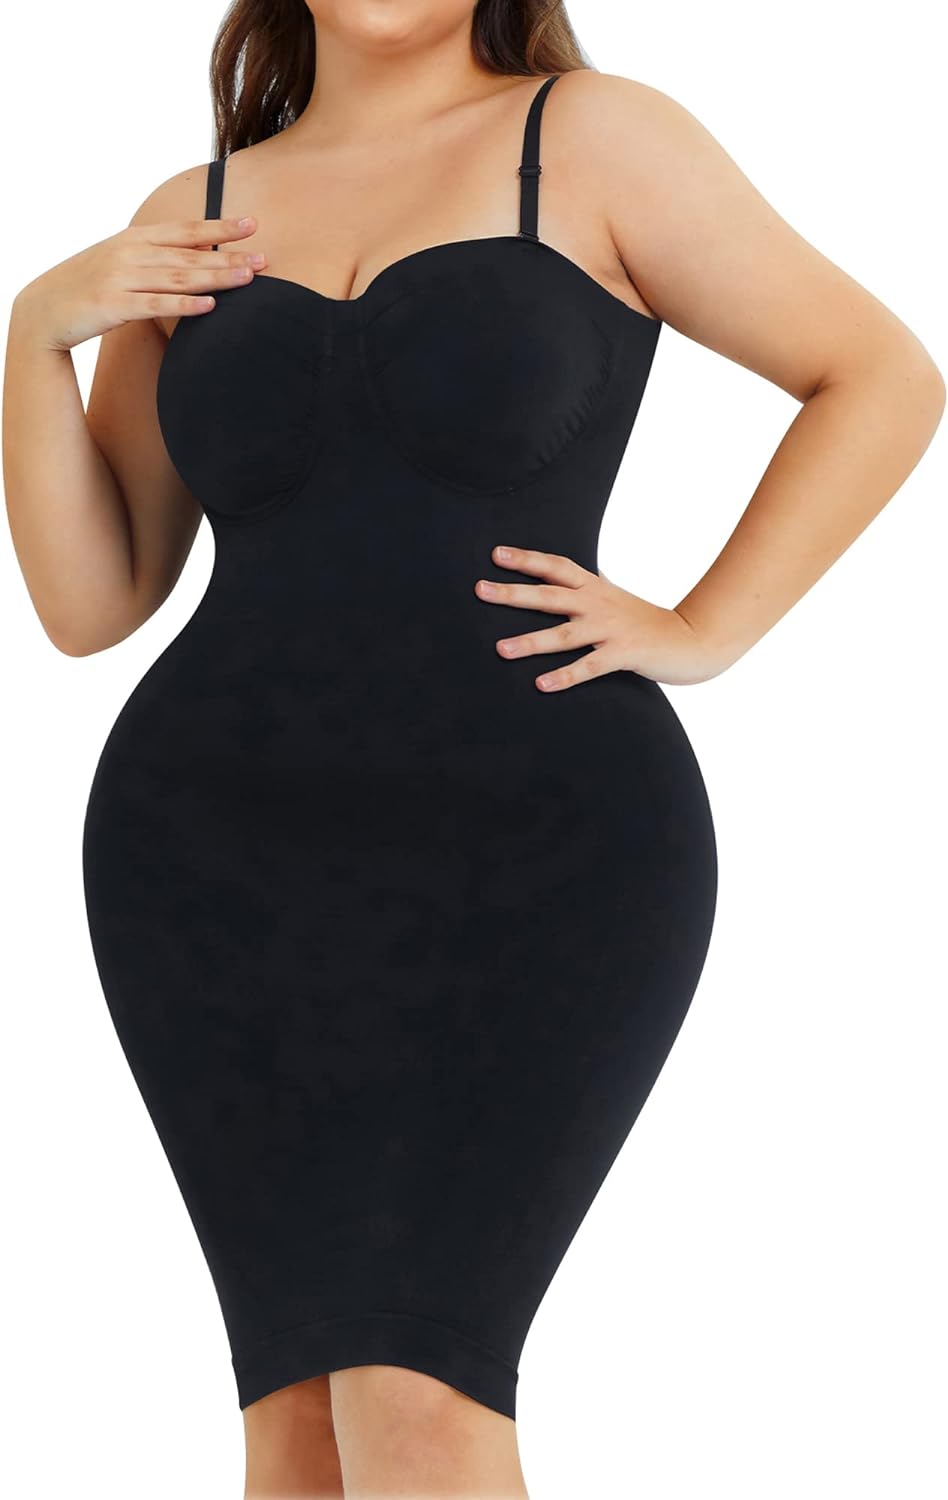 Takusun Women's Shapewear Full Slips Open Bust Tummy Control Seamless  Hourglass Body Shaper Slimmer Sexy for Under Dresses at  Women's  Clothing store